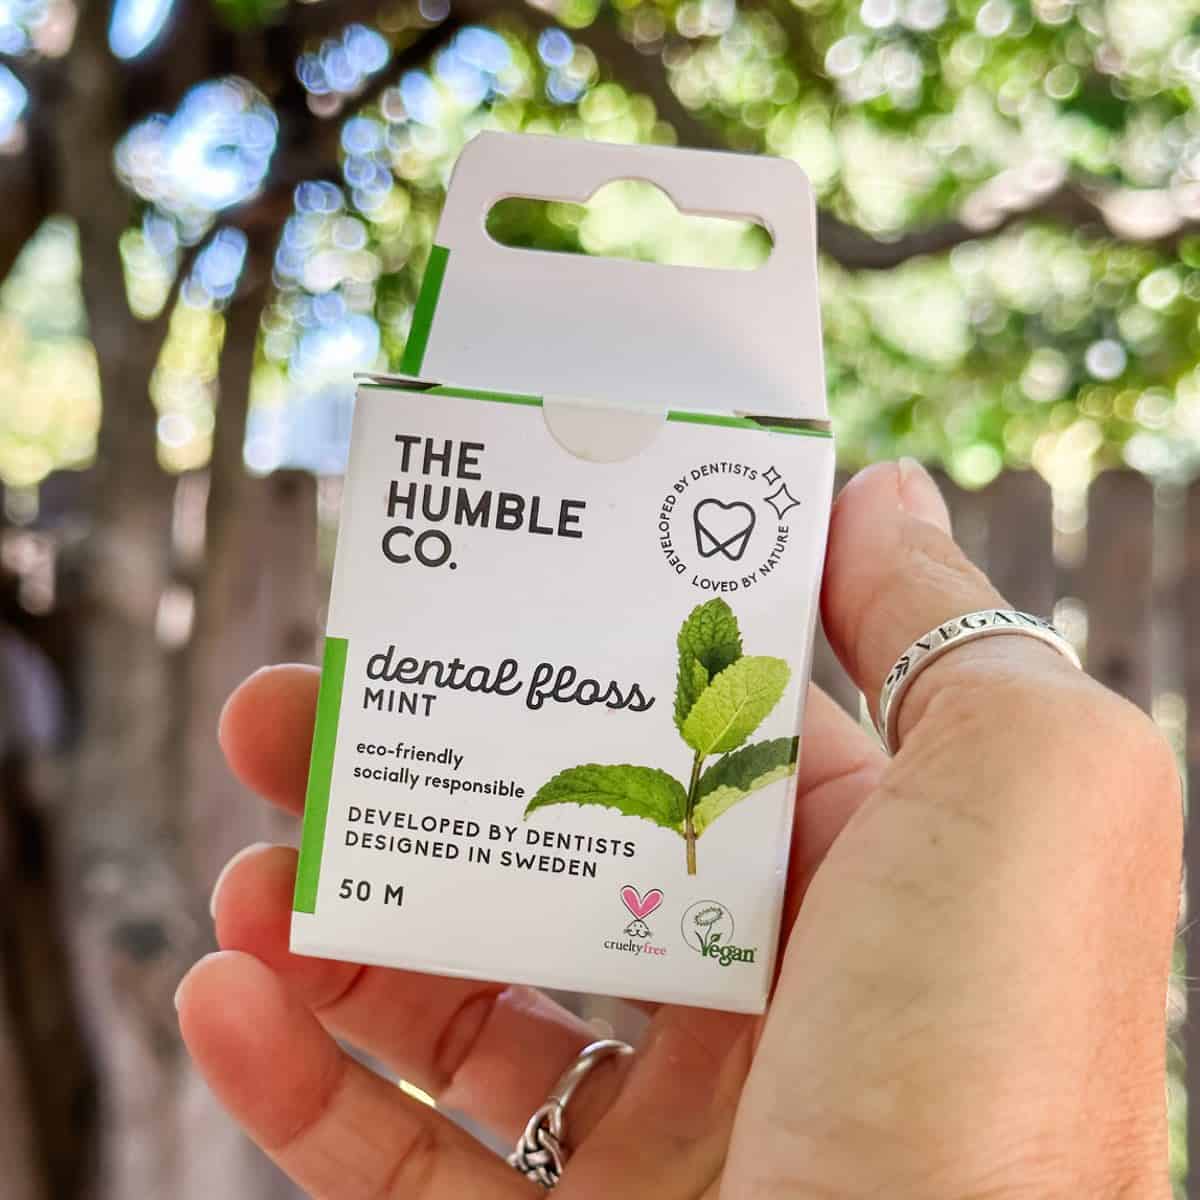 Vegan floss brands and packaging including the zero waste cardboard dental floss from The Humble Co.